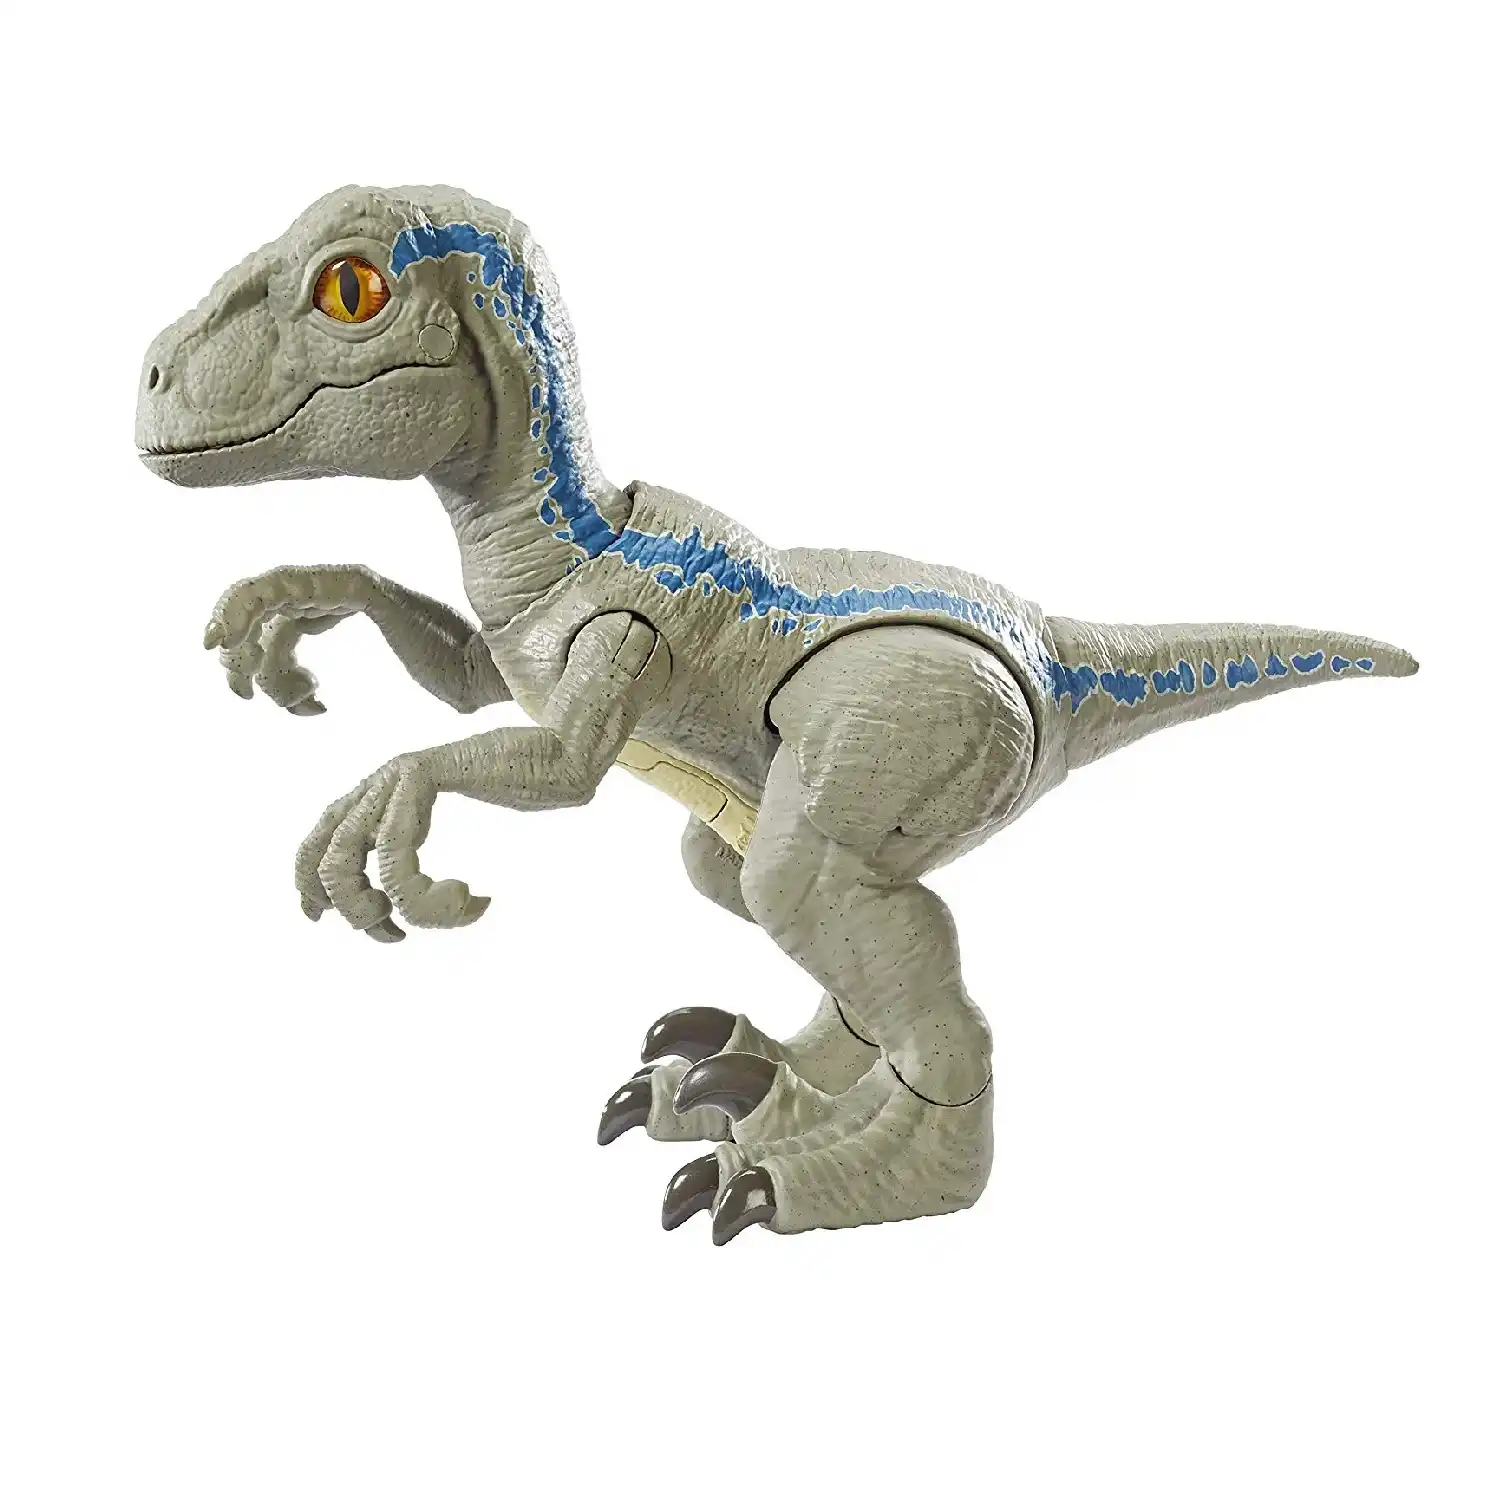 Original Jurassic World Dinosaurs Toy Sound Intelligent Raptor Joint Movable Model Action Figure Toys For Children Christmas Action Toy Figures Aliexpress - velociraptor roblox